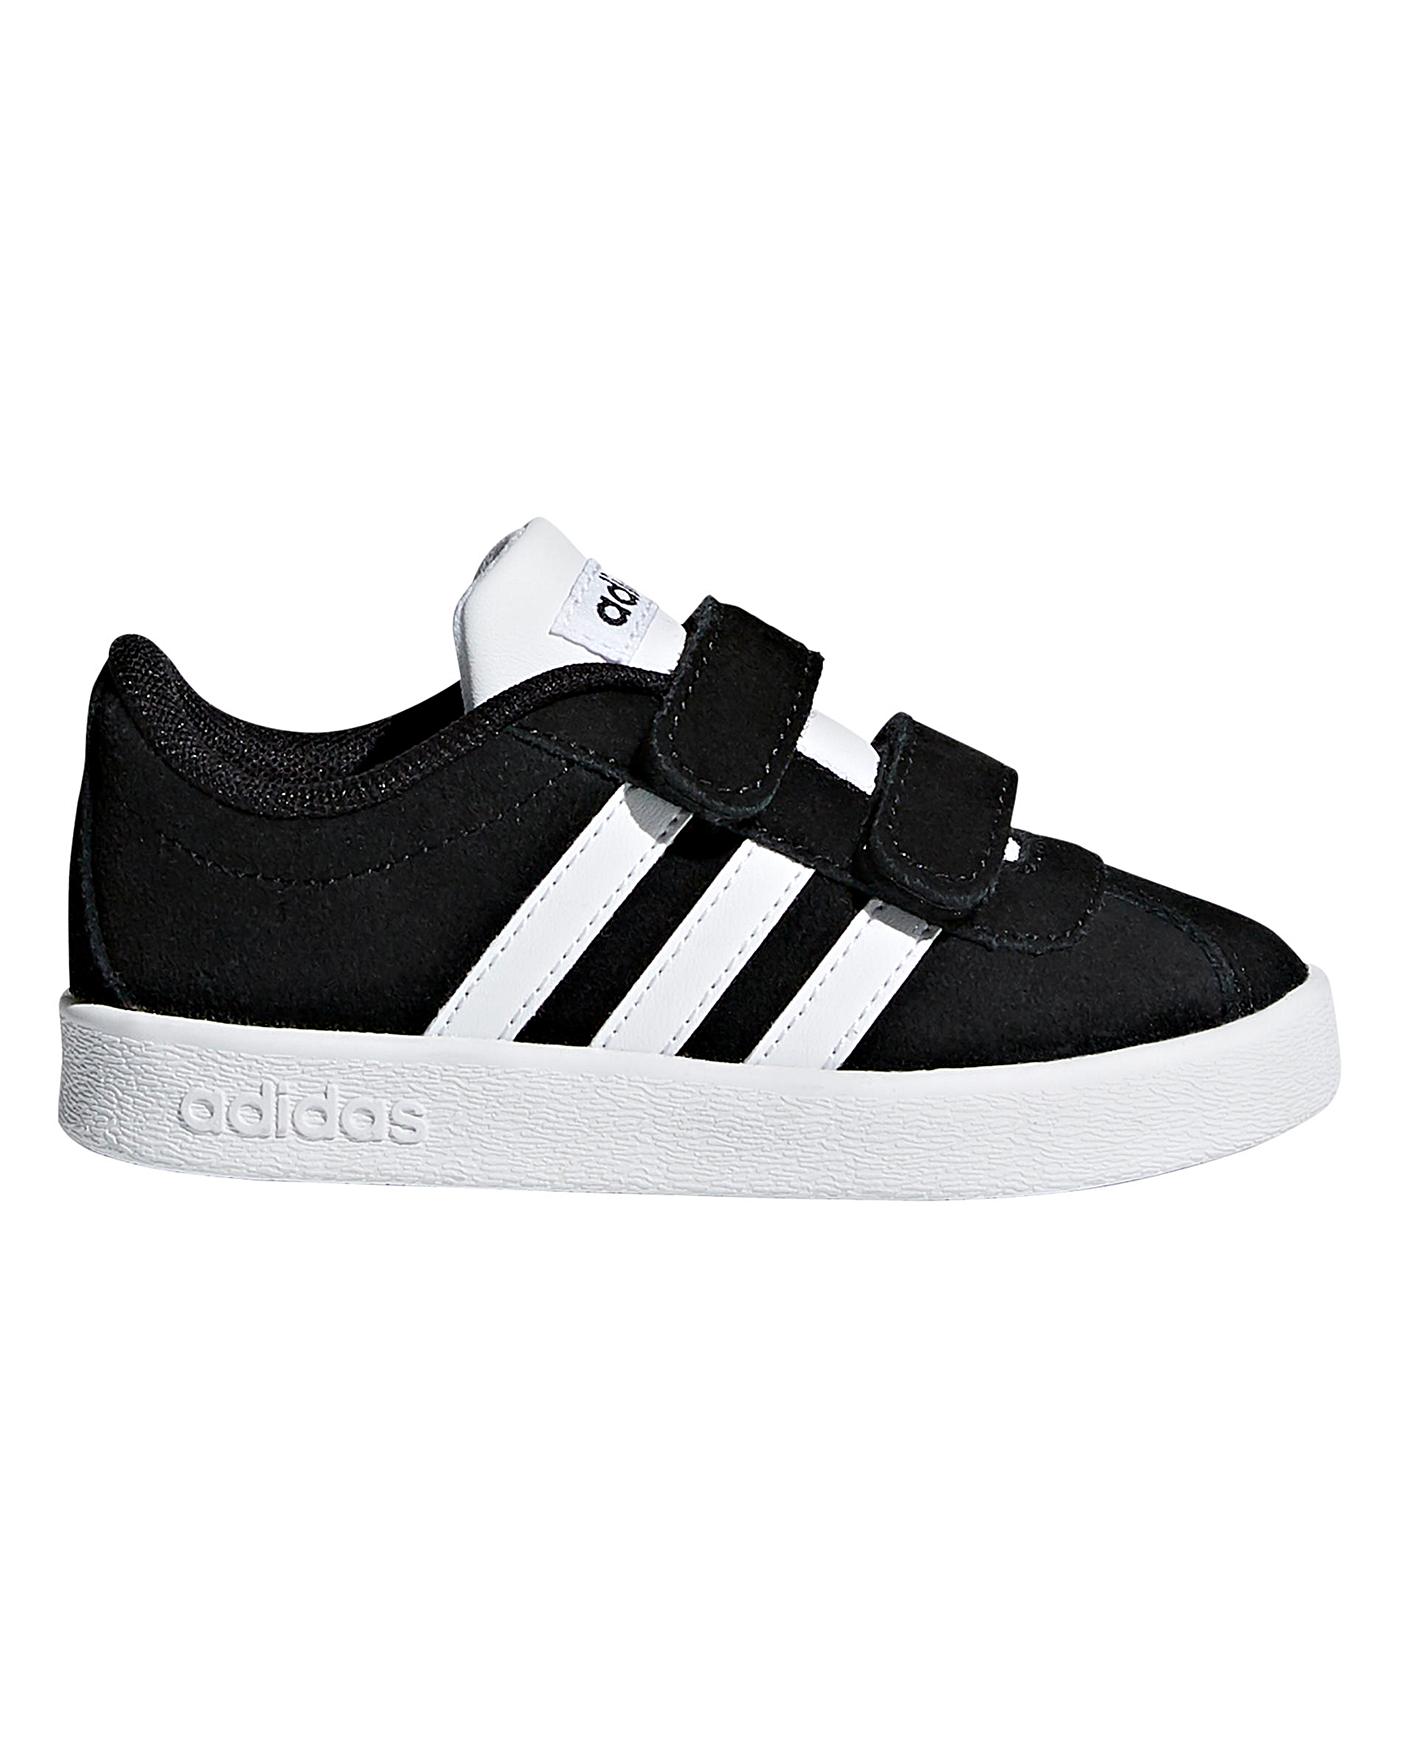 Adidas VL Court 2.0 CMF Infant Trainers 